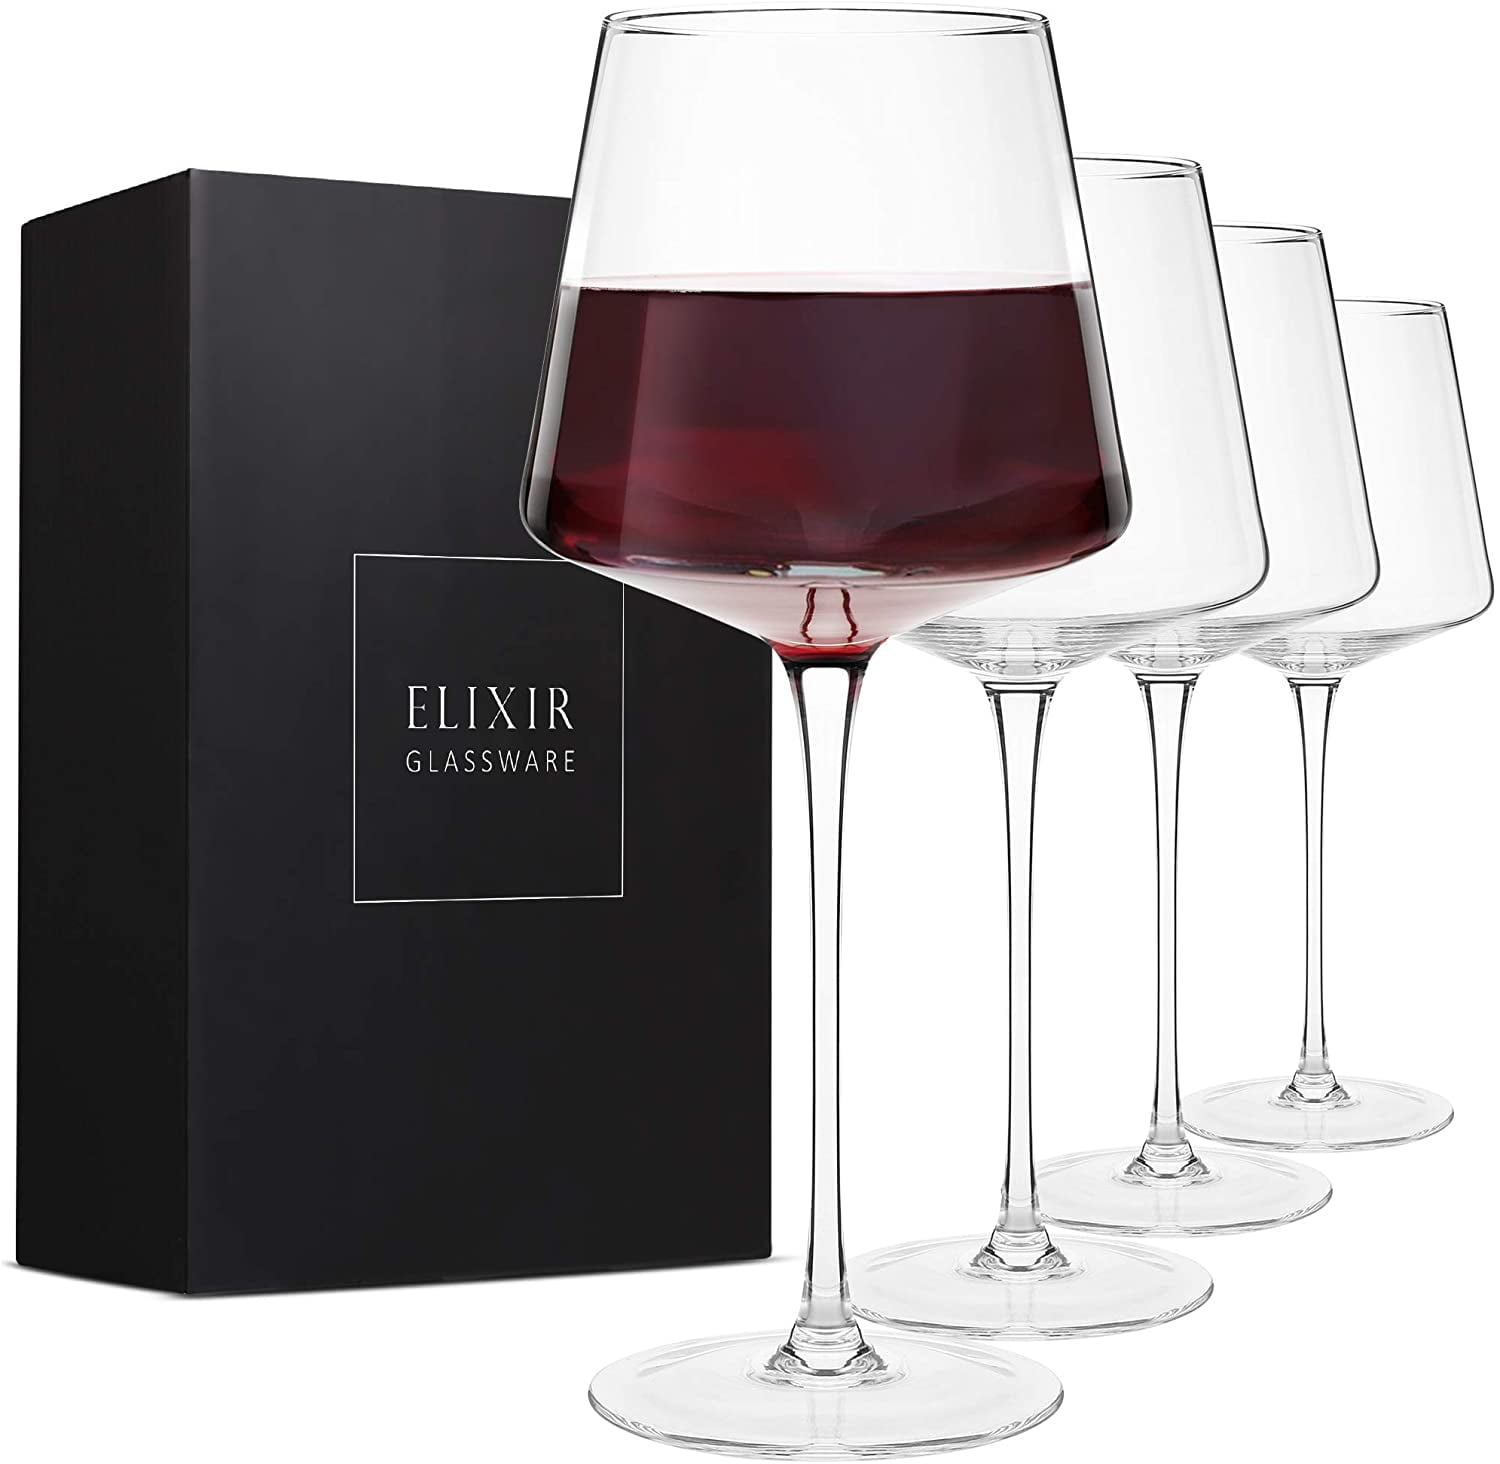 Wine Glasses Set Of 4,Durable Red Wine Glasses For Bordeaux/Cabernet,Thick Resis 